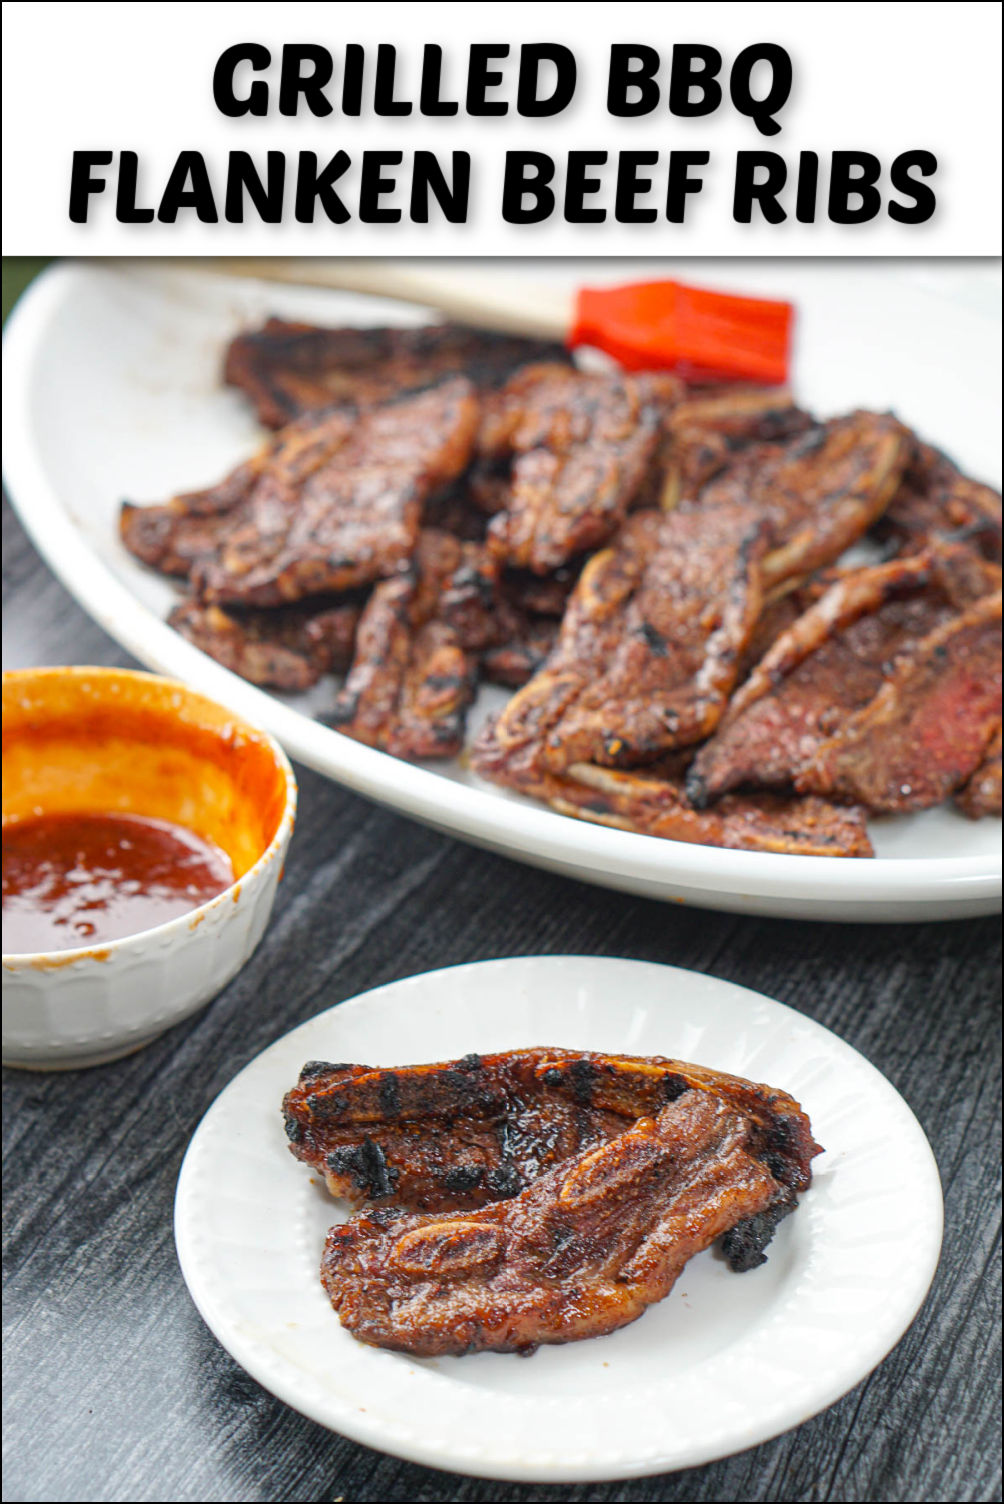 white plate and platter with grilled barbecue short ribs and text